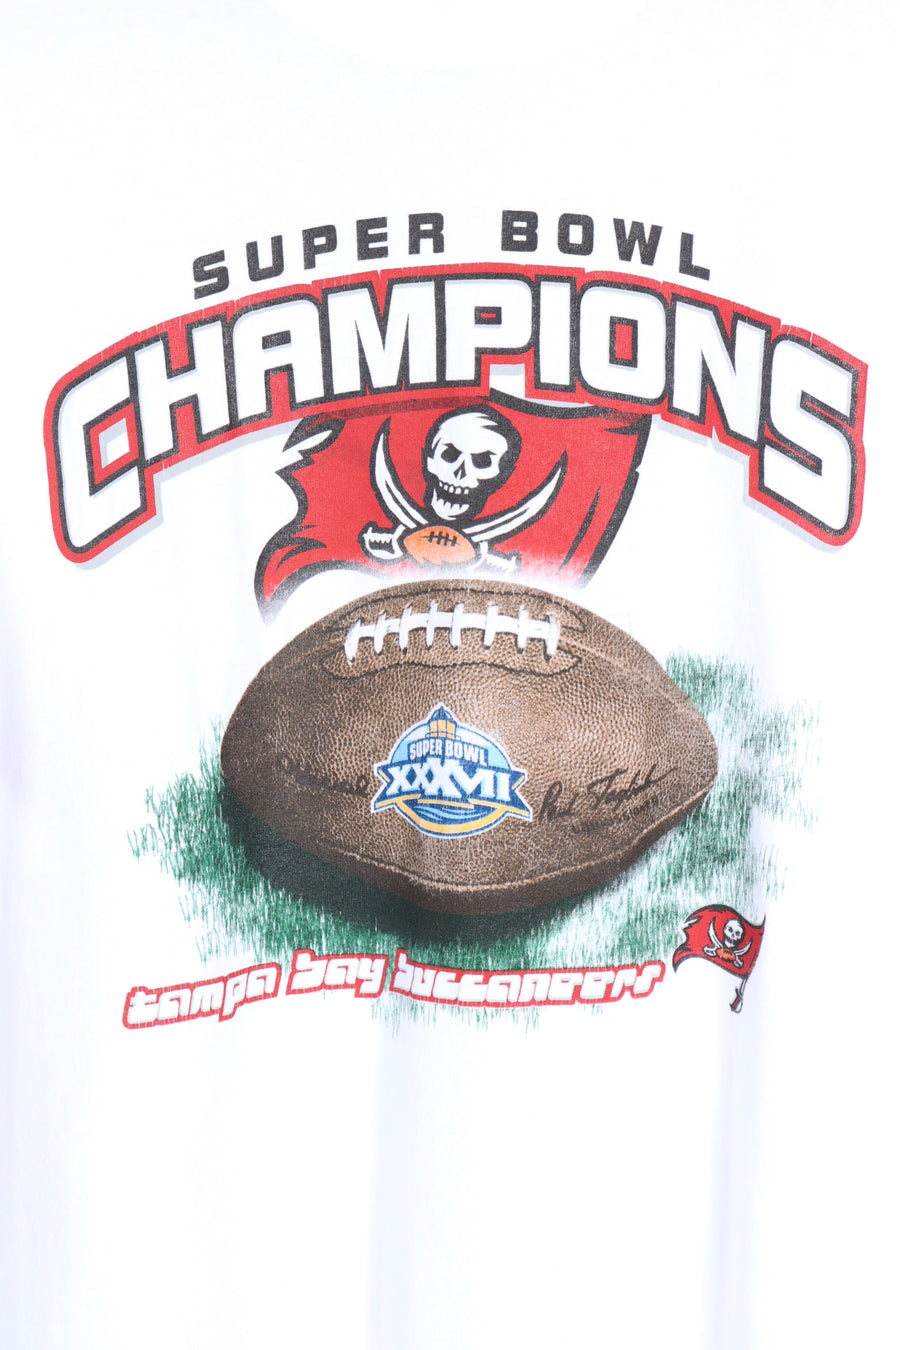 Super Bowl Champions Tampa Bay Buccaneers Football Graphic Tee (L) - Vintage Sole Melbourne